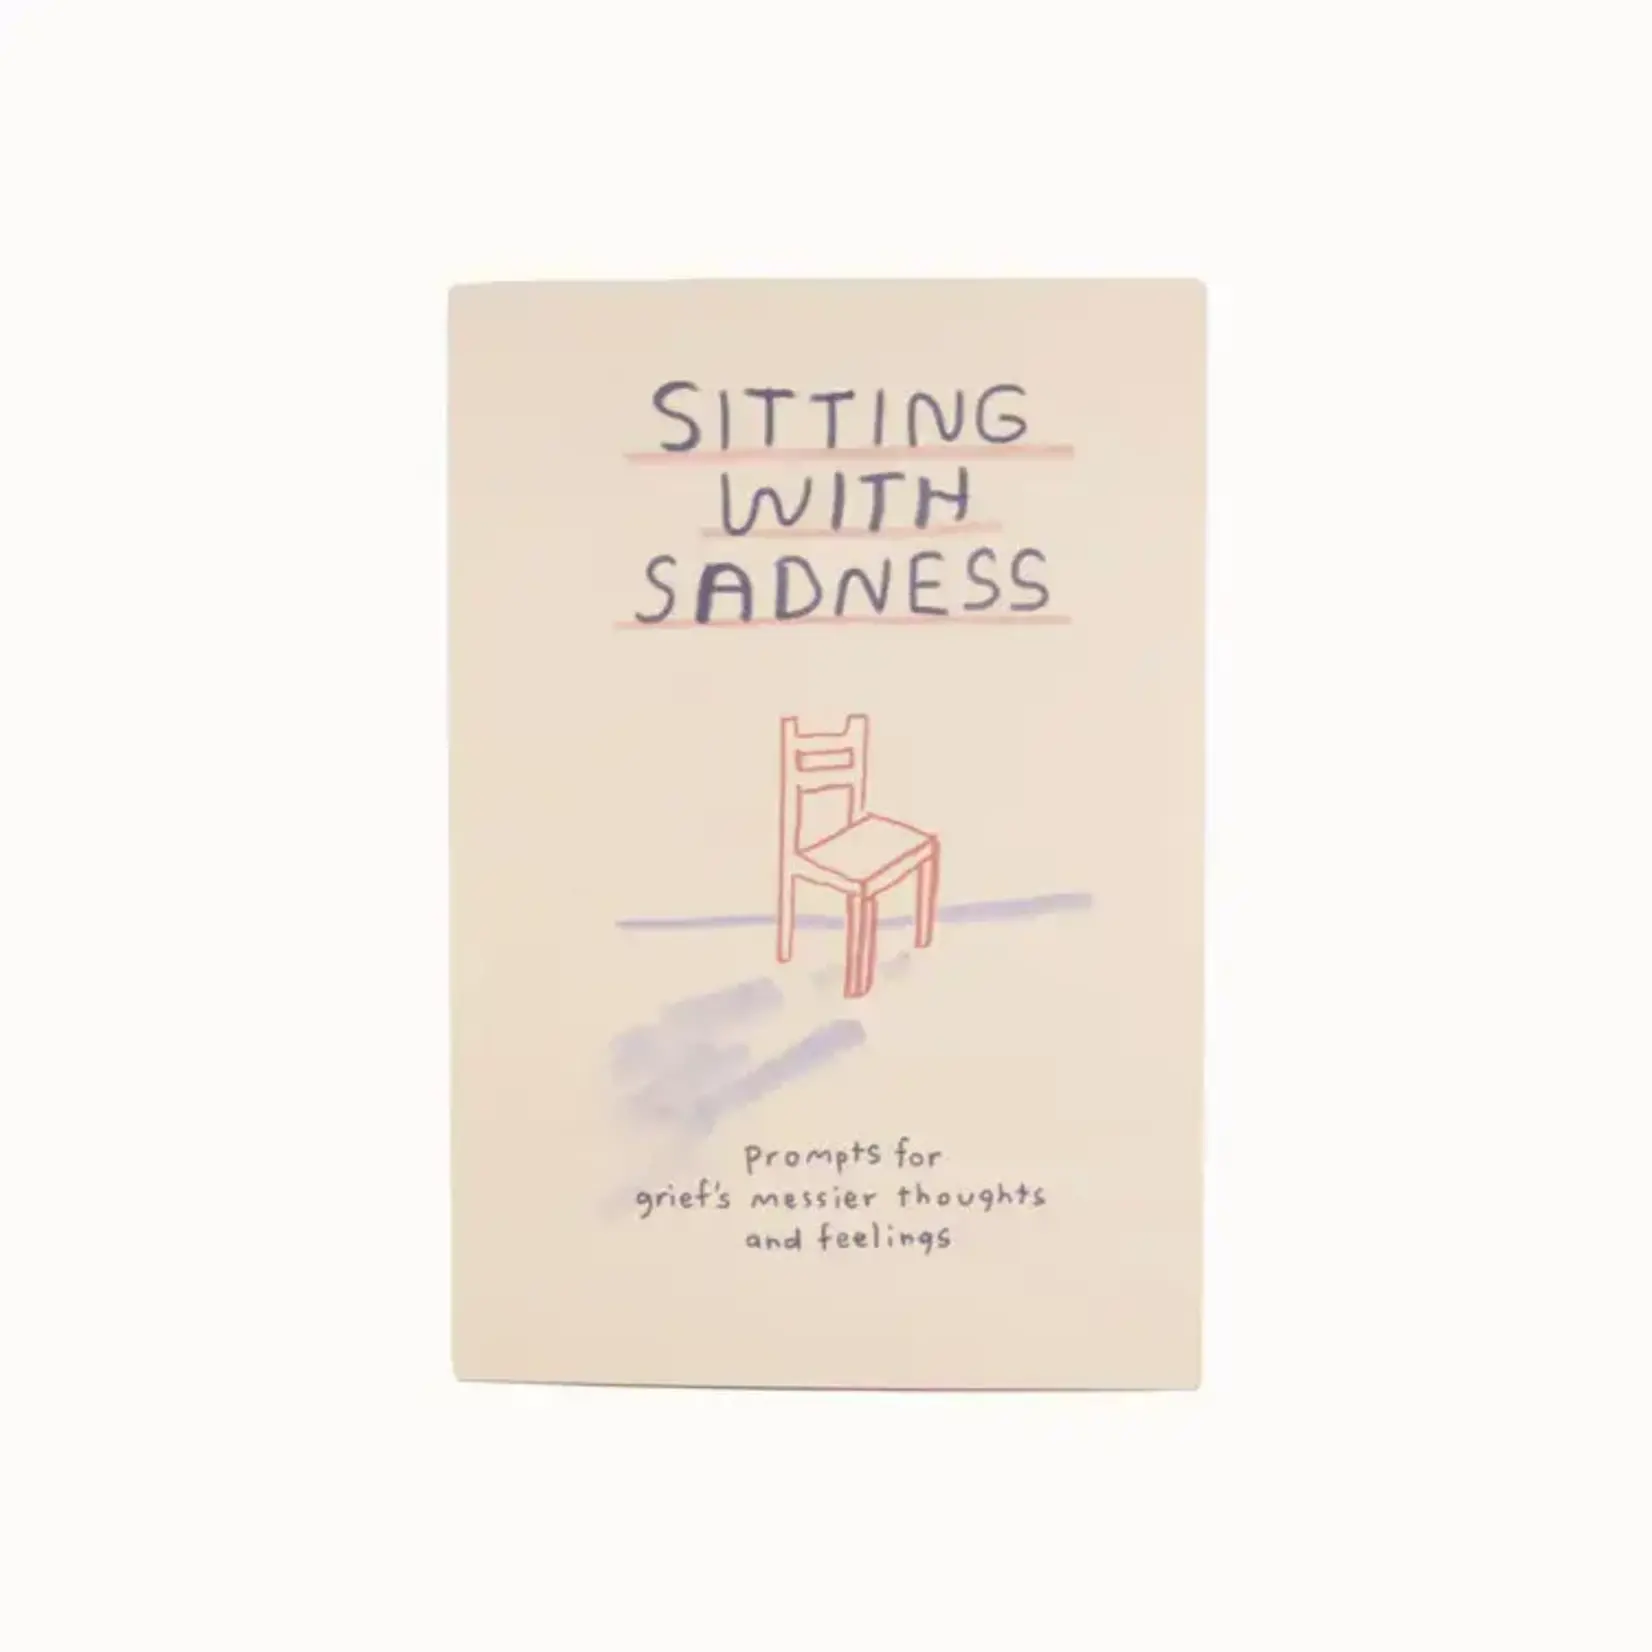 Book - Sitting With Sadness Prompts For Grief’s Messier Thoughts And Feelings